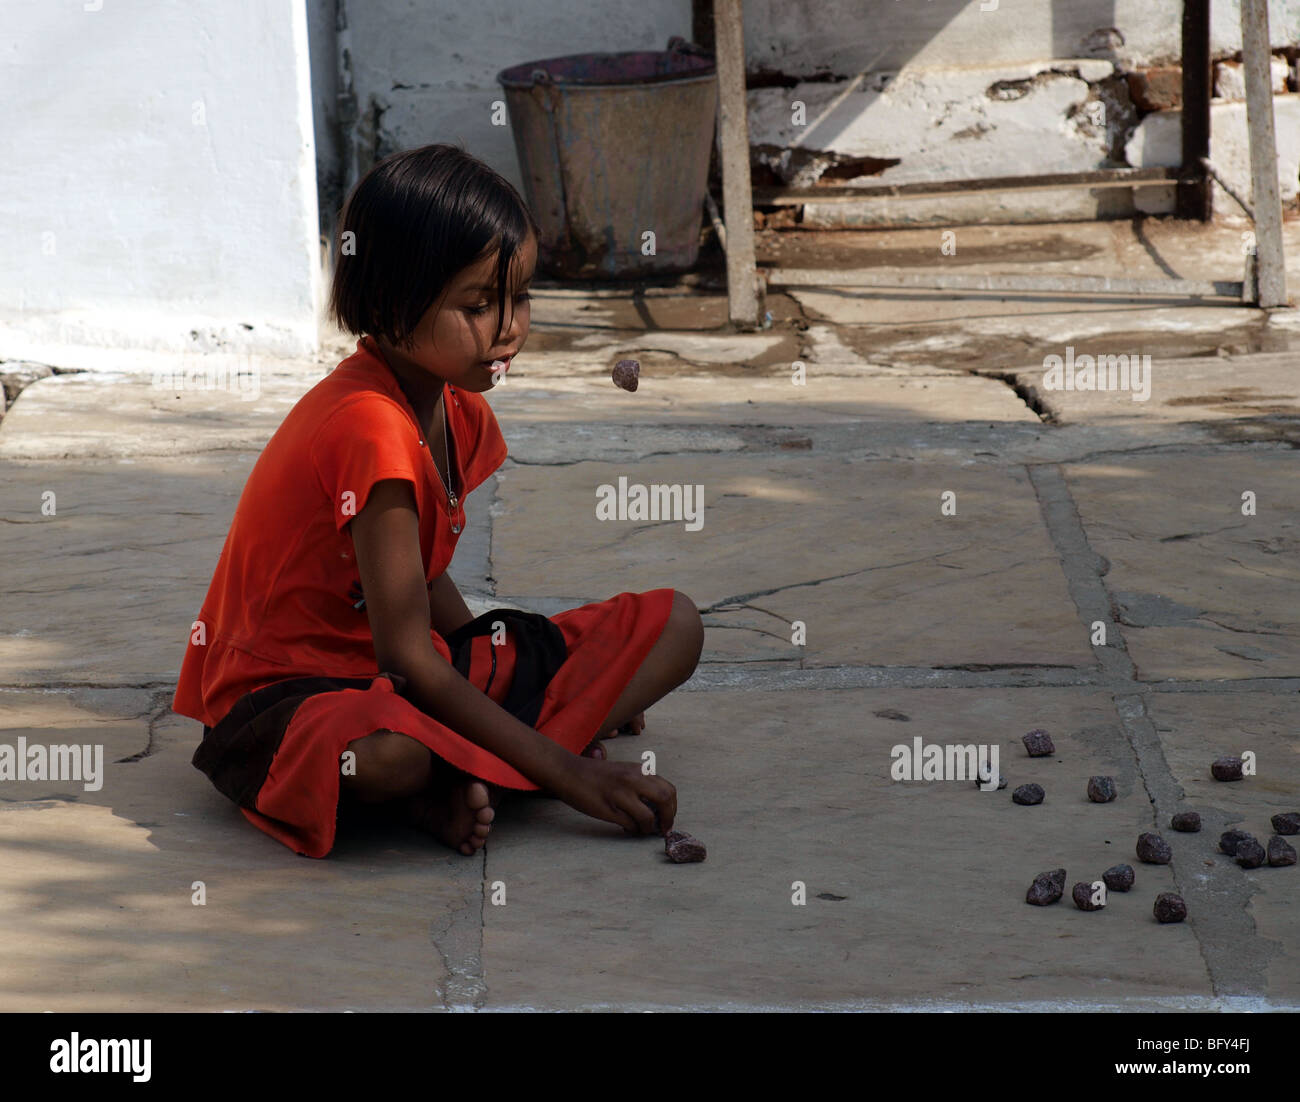 squatting girl dressed in red  playing jacks with stones on yard flagstones in India Stock Photo